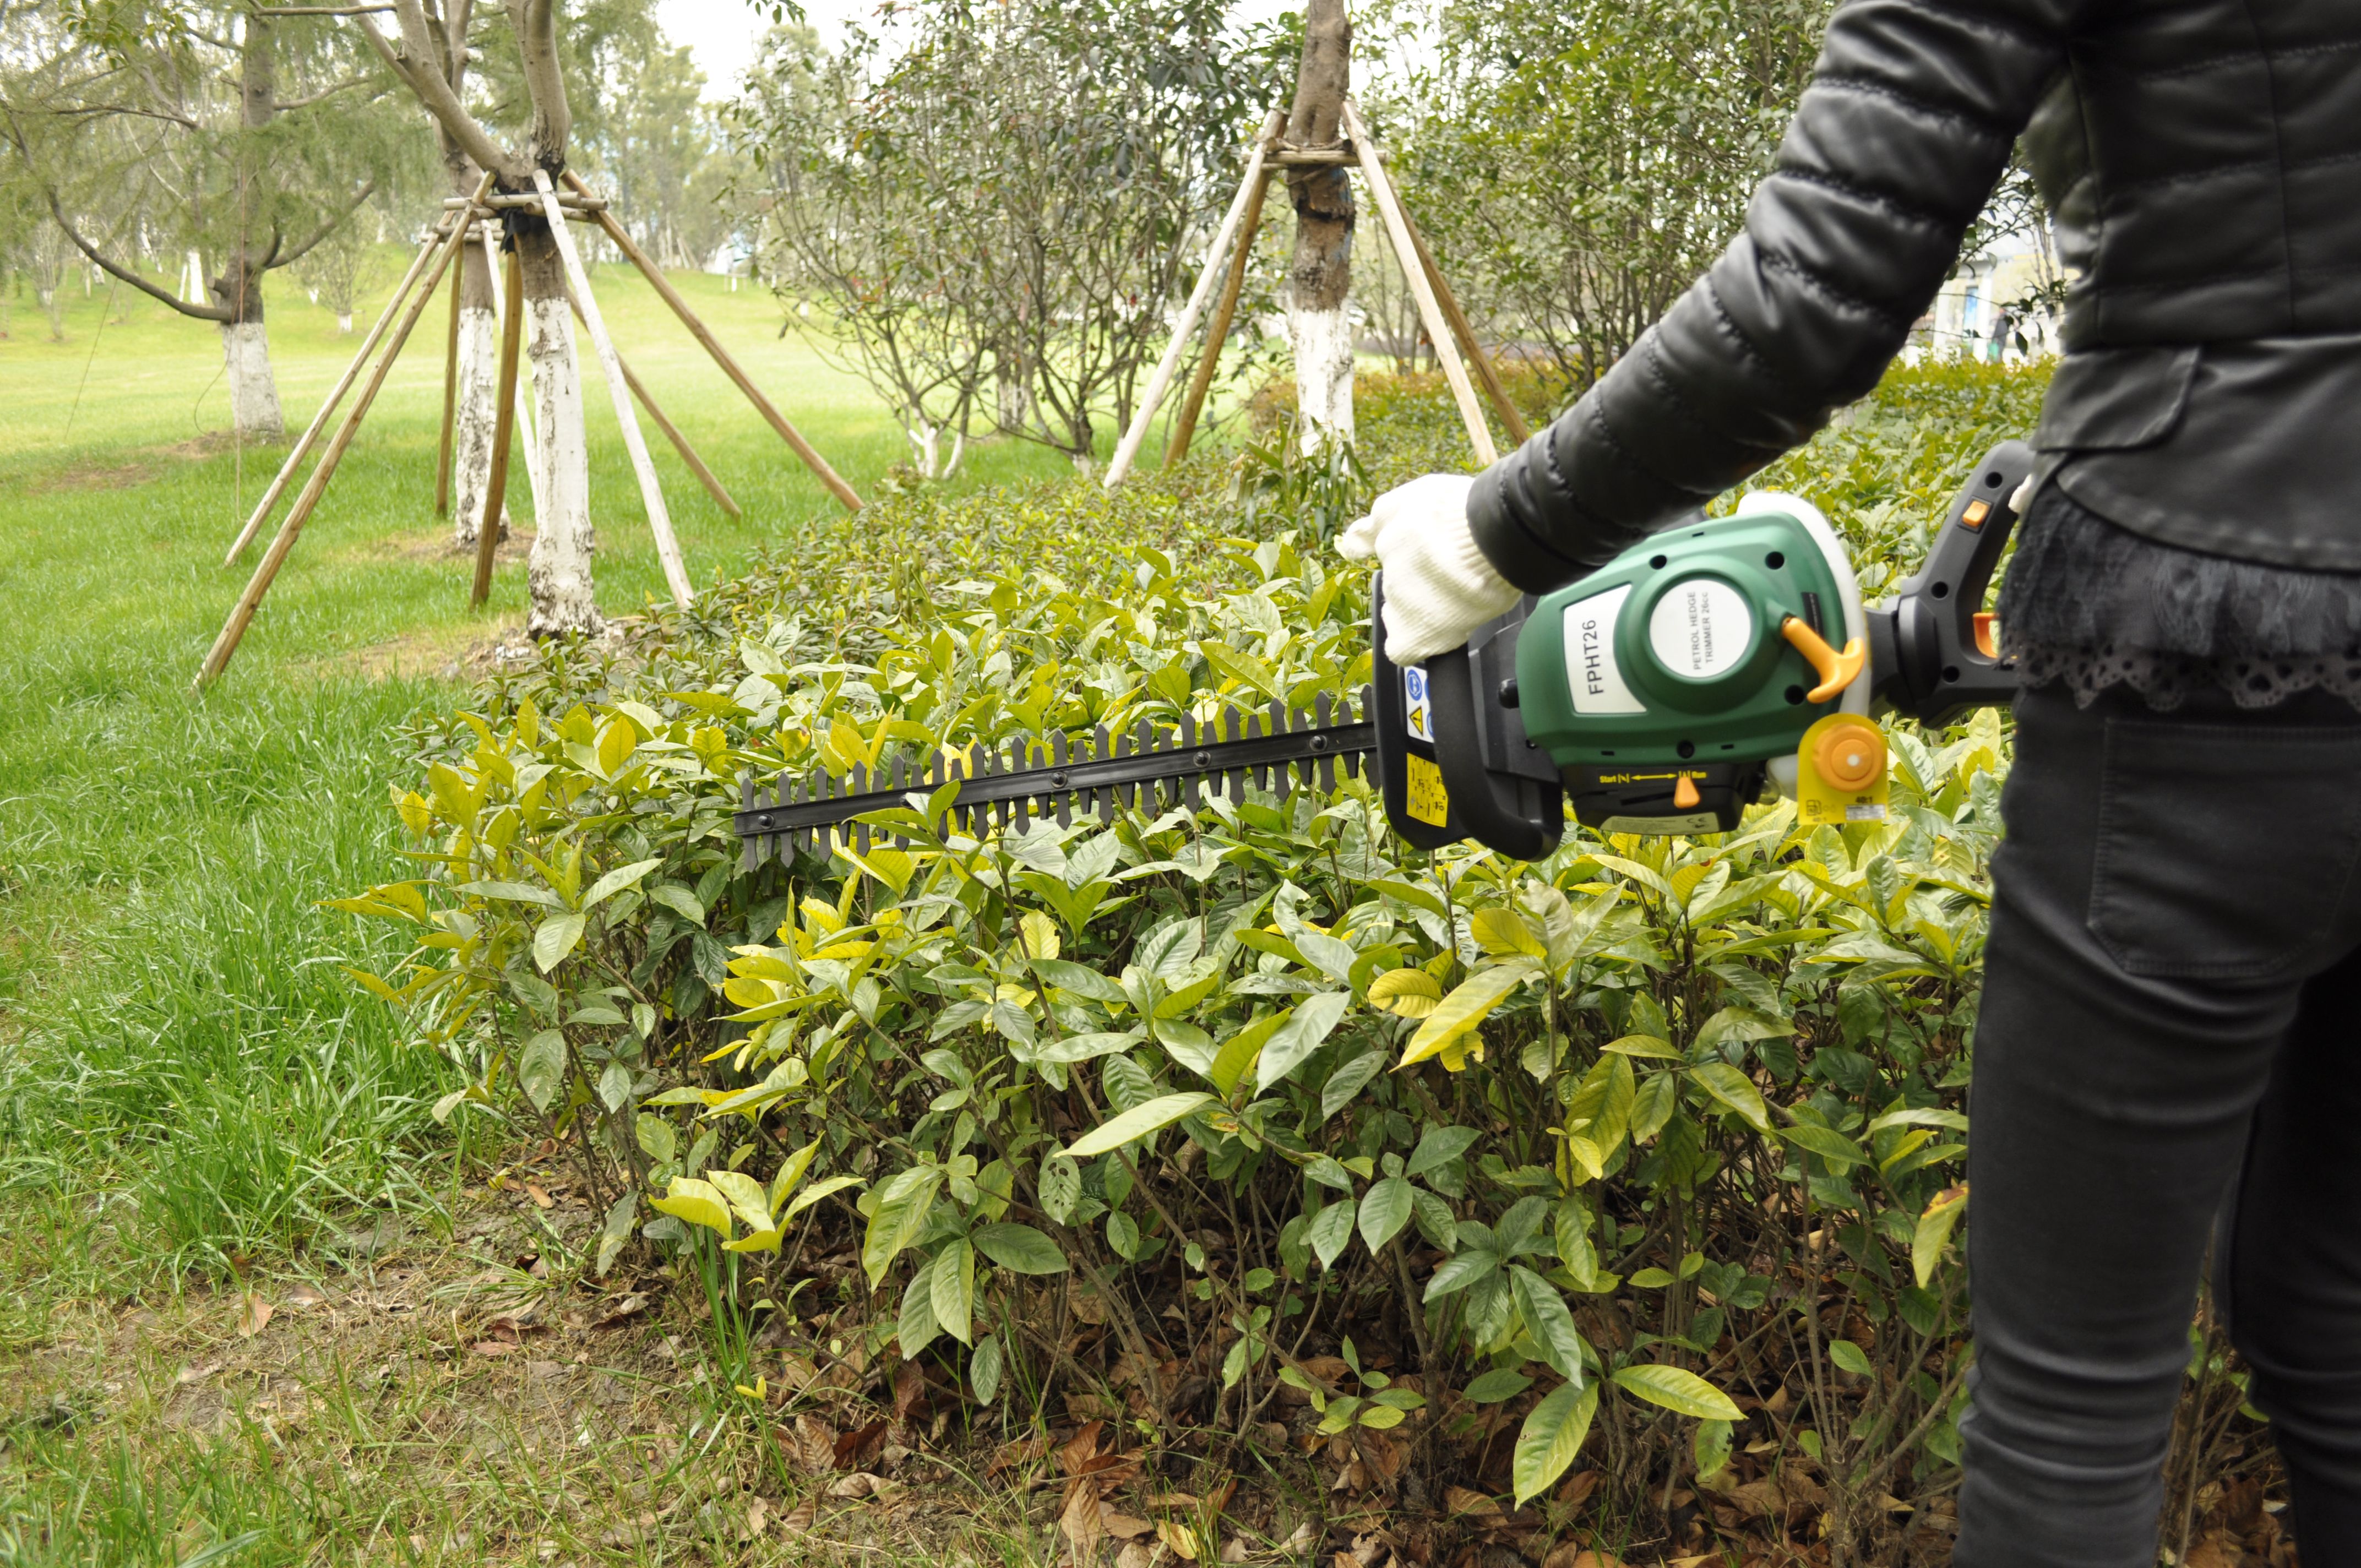 b and q hedge trimmer